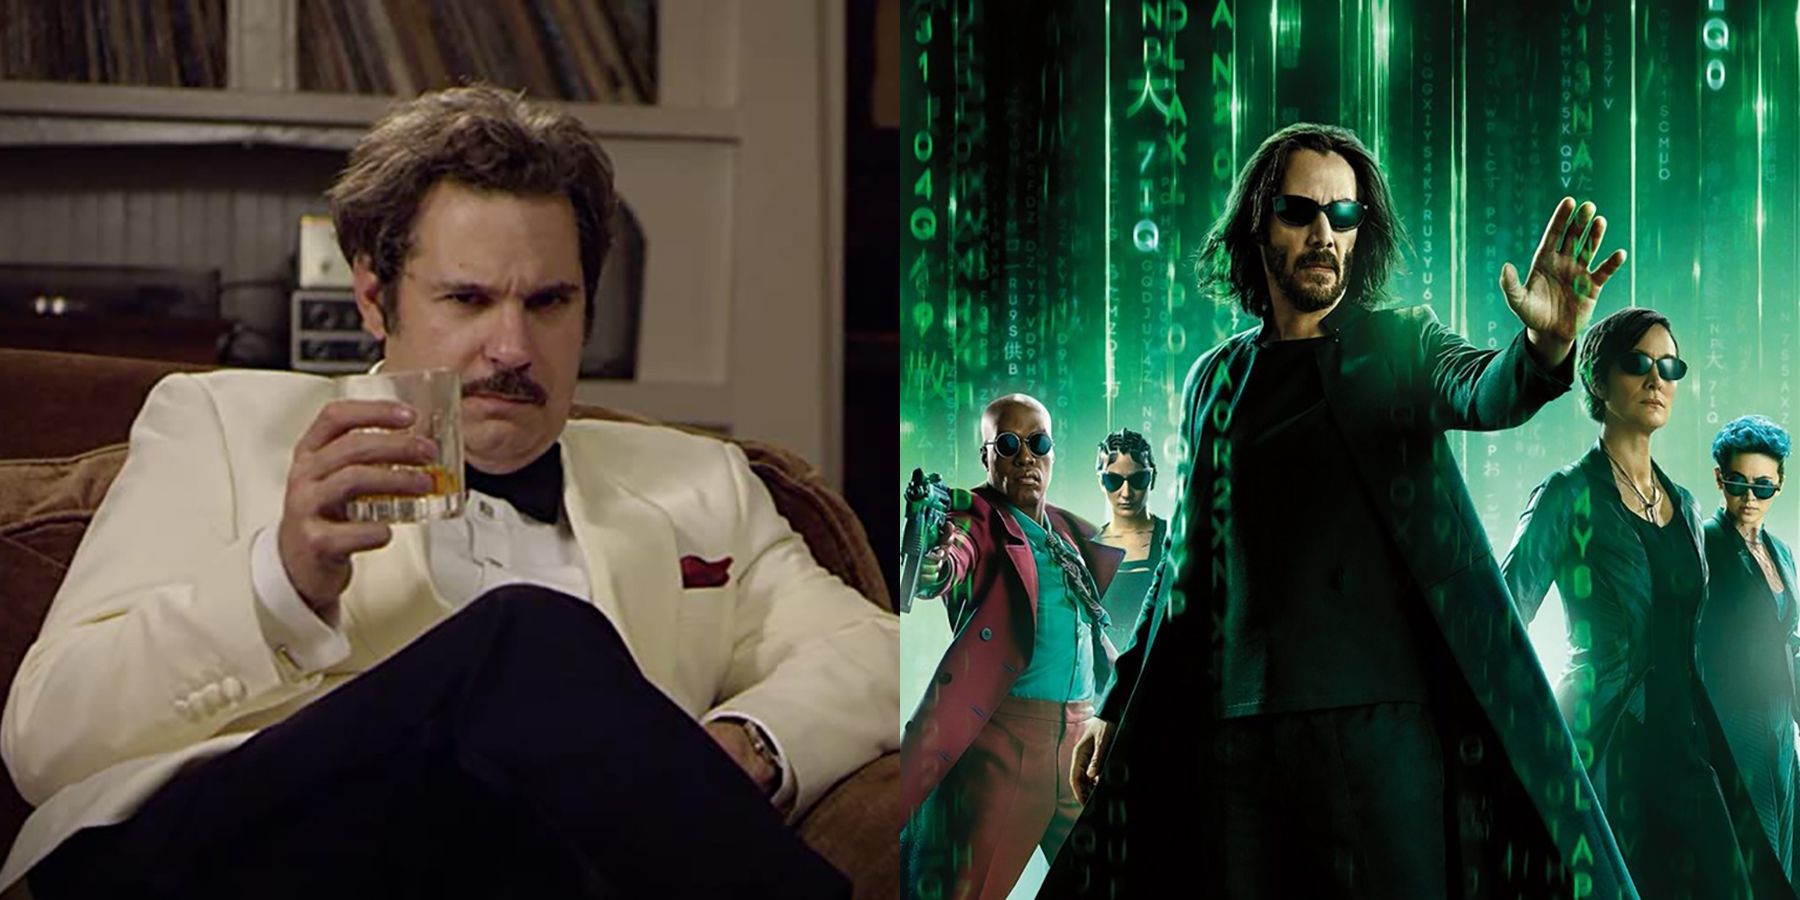 Paul F. Tompkins Reacts To The Matrix 4 Clip With Jessica Henwick